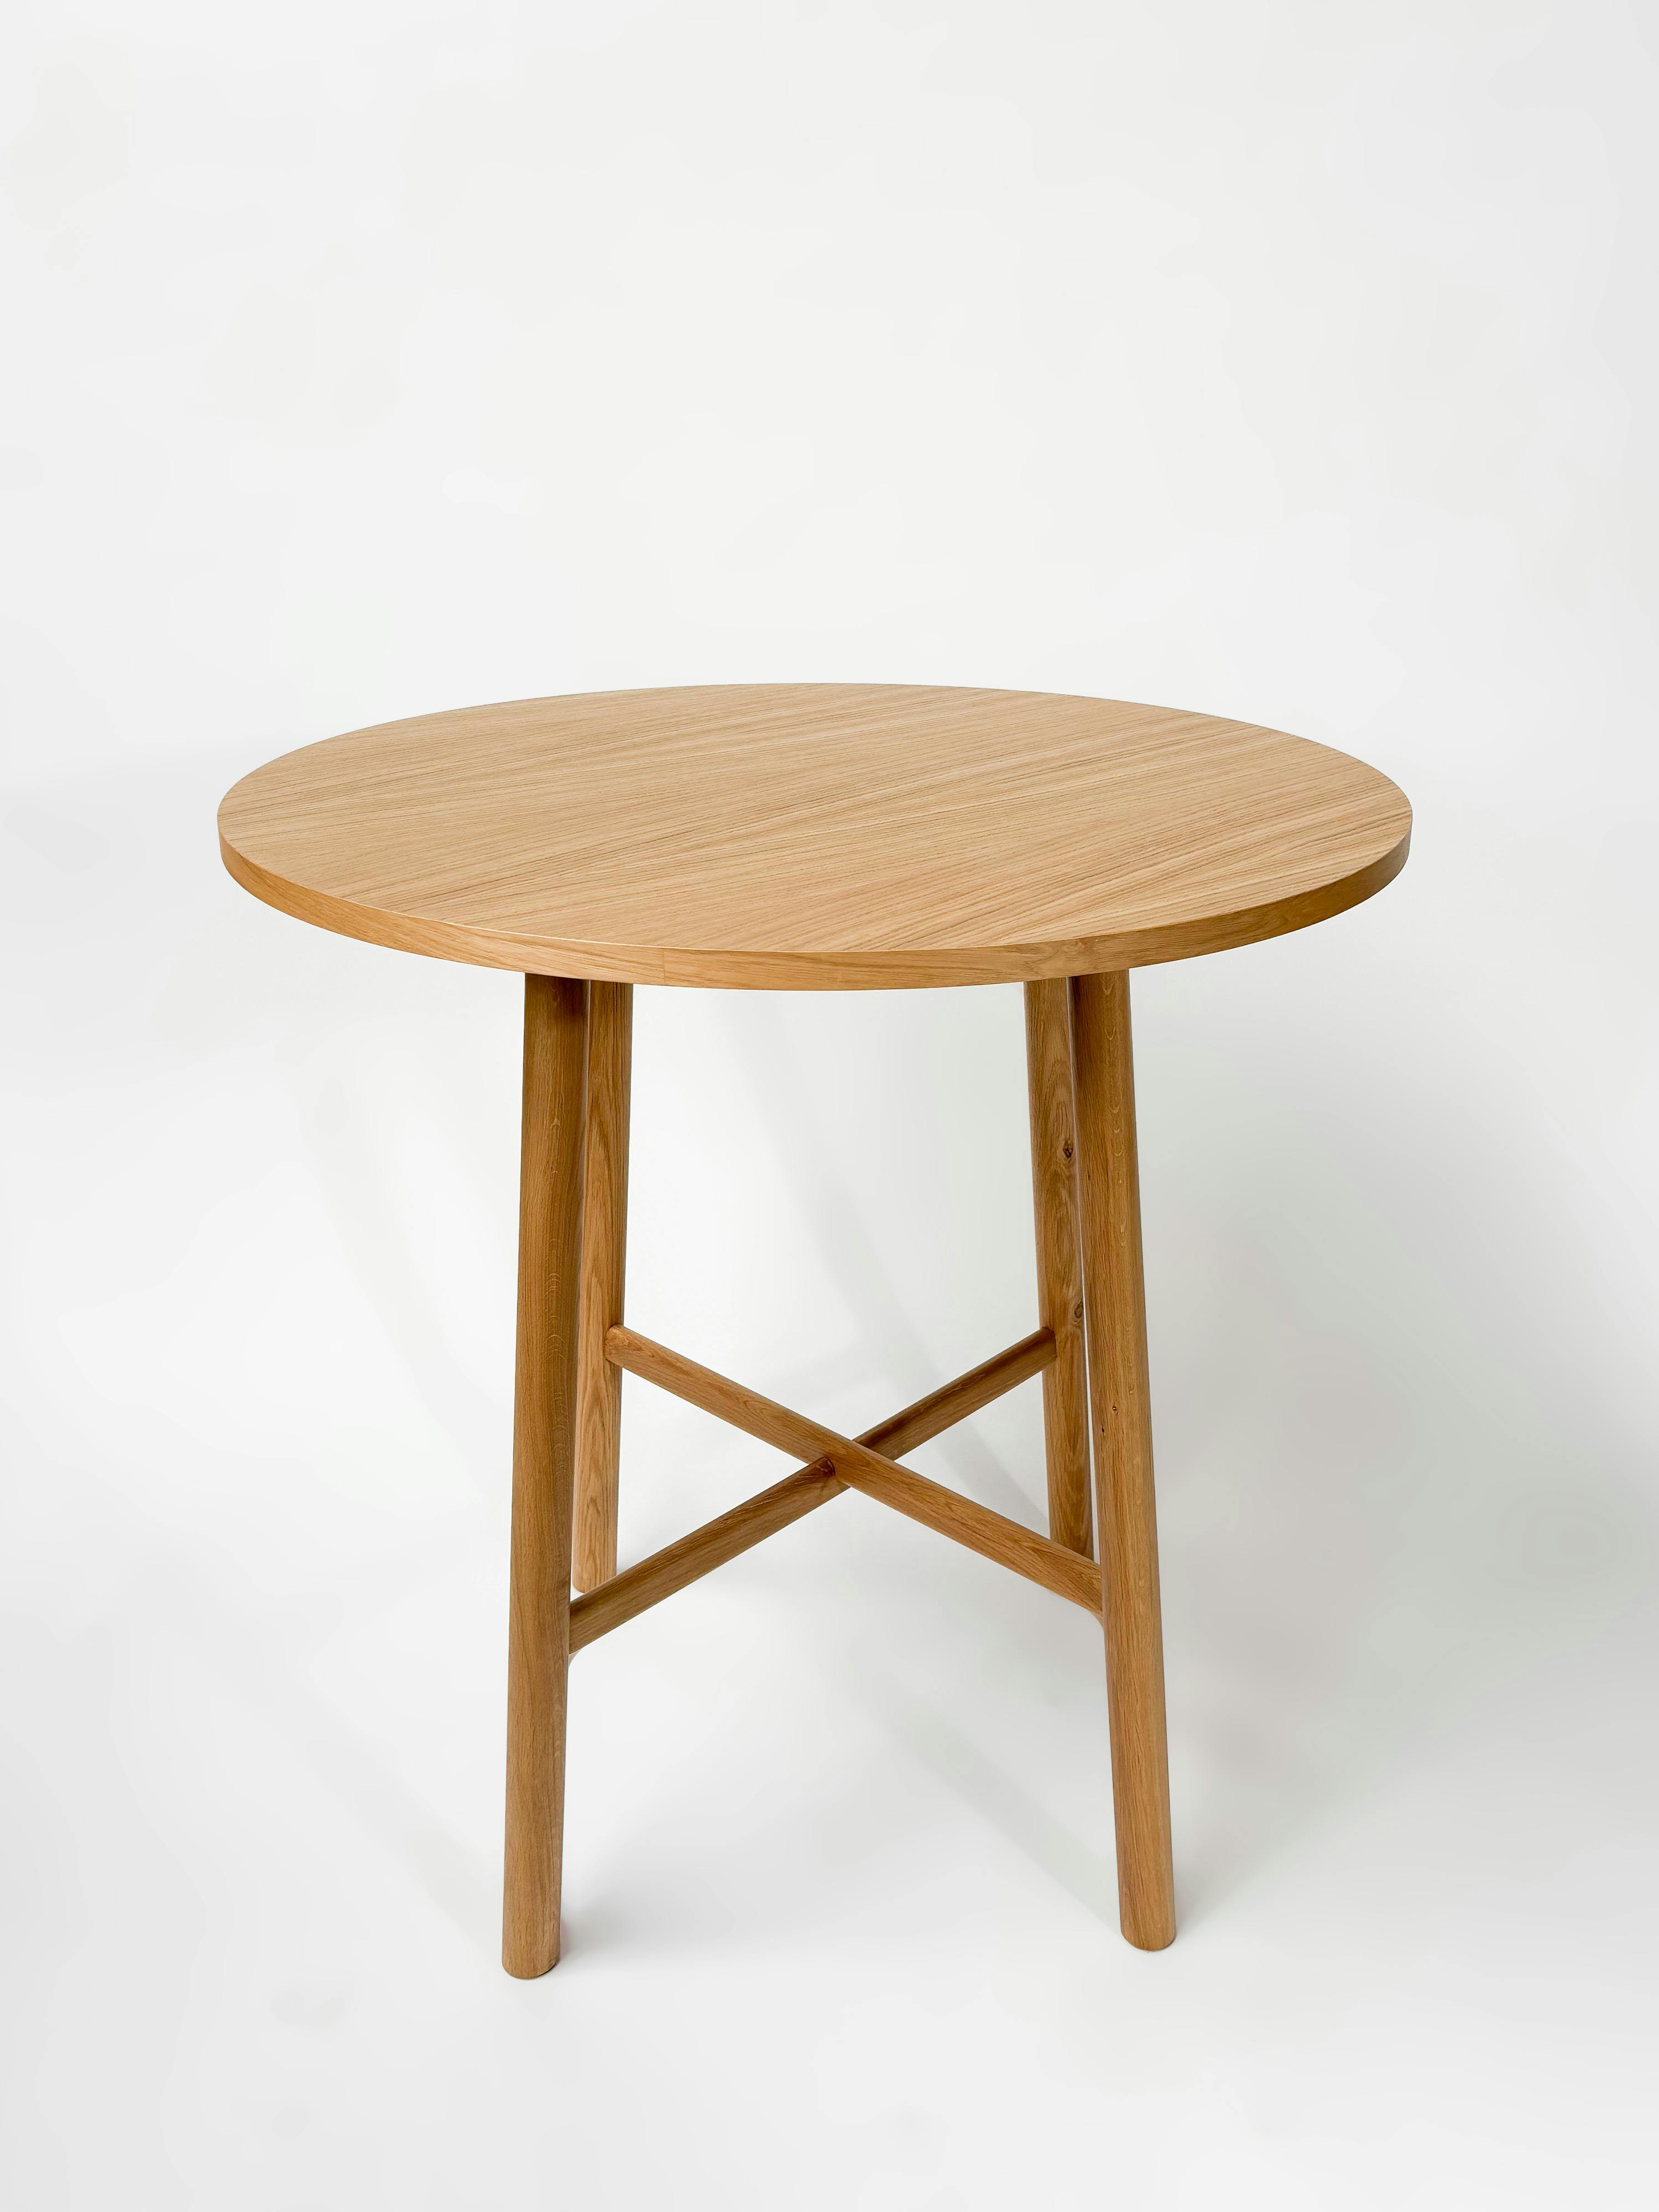 CRUSO Natural Oak High Wooden Round Table - 90cm - Relieve Furniture